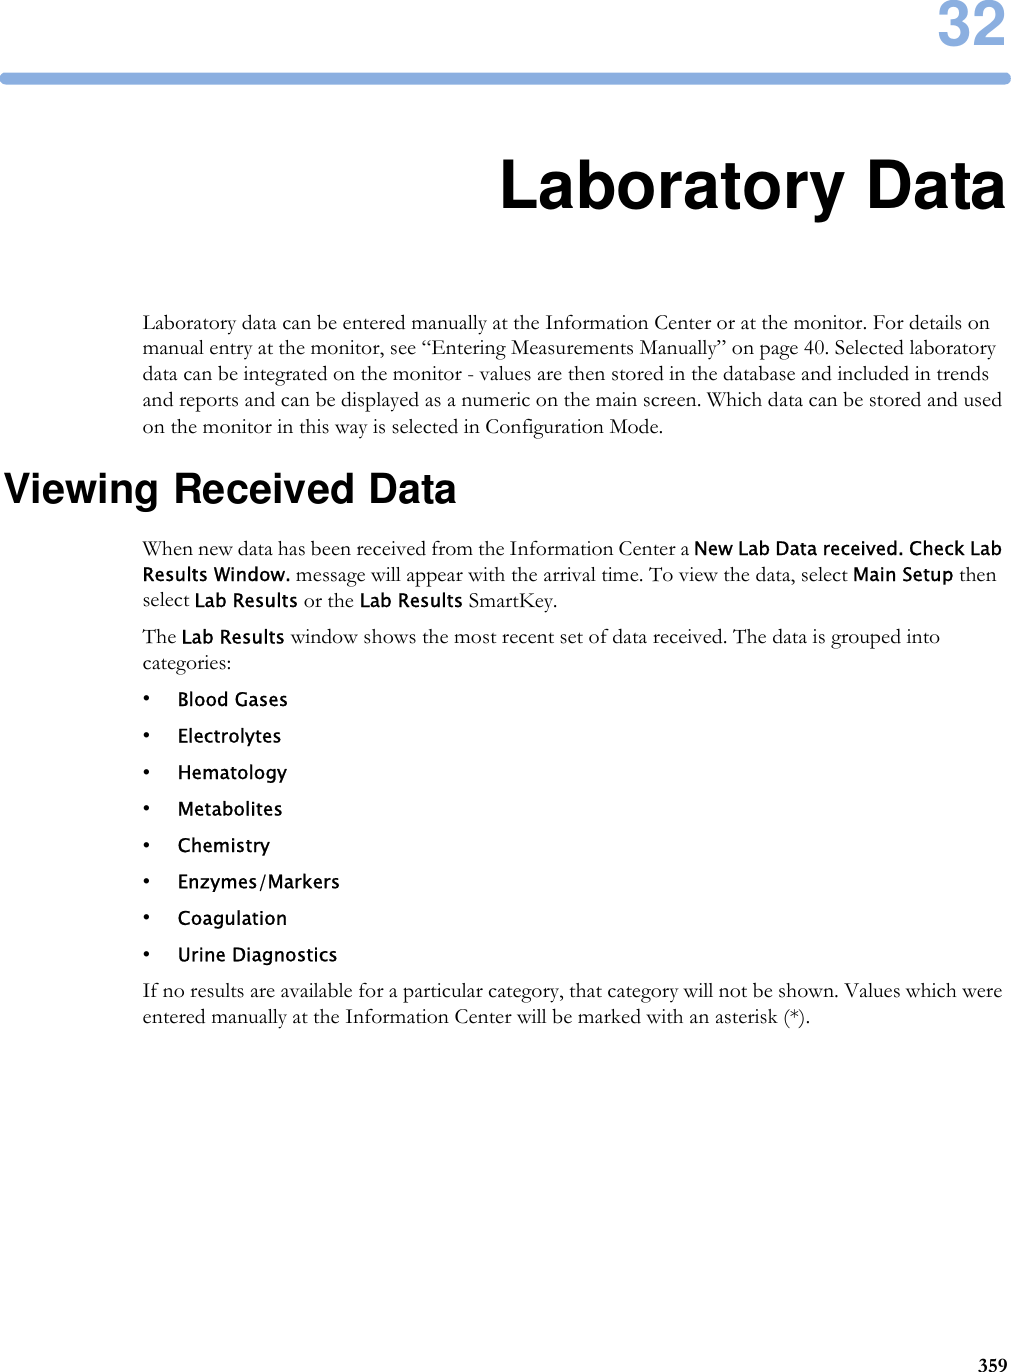 3235932Laboratory DataLaboratory data can be entered manually at the Information Center or at the monitor. For details on manual entry at the monitor, see “Entering Measurements Manually” on page 40. Selected laboratory data can be integrated on the monitor - values are then stored in the database and included in trends and reports and can be displayed as a numeric on the main screen. Which data can be stored and used on the monitor in this way is selected in Configuration Mode.Viewing Received DataWhen new data has been received from the Information Center a New Lab Data received. Check Lab Results Window. message will appear with the arrival time. To view the data, select Main Setup then select Lab Results or the Lab Results SmartKey.The Lab Results window shows the most recent set of data received. The data is grouped into categories:•Blood Gases•Electrolytes•Hematology•Metabolites•Chemistry•Enzymes/Markers•Coagulation•Urine DiagnosticsIf no results are available for a particular category, that category will not be shown. Values which were entered manually at the Information Center will be marked with an asterisk (*).